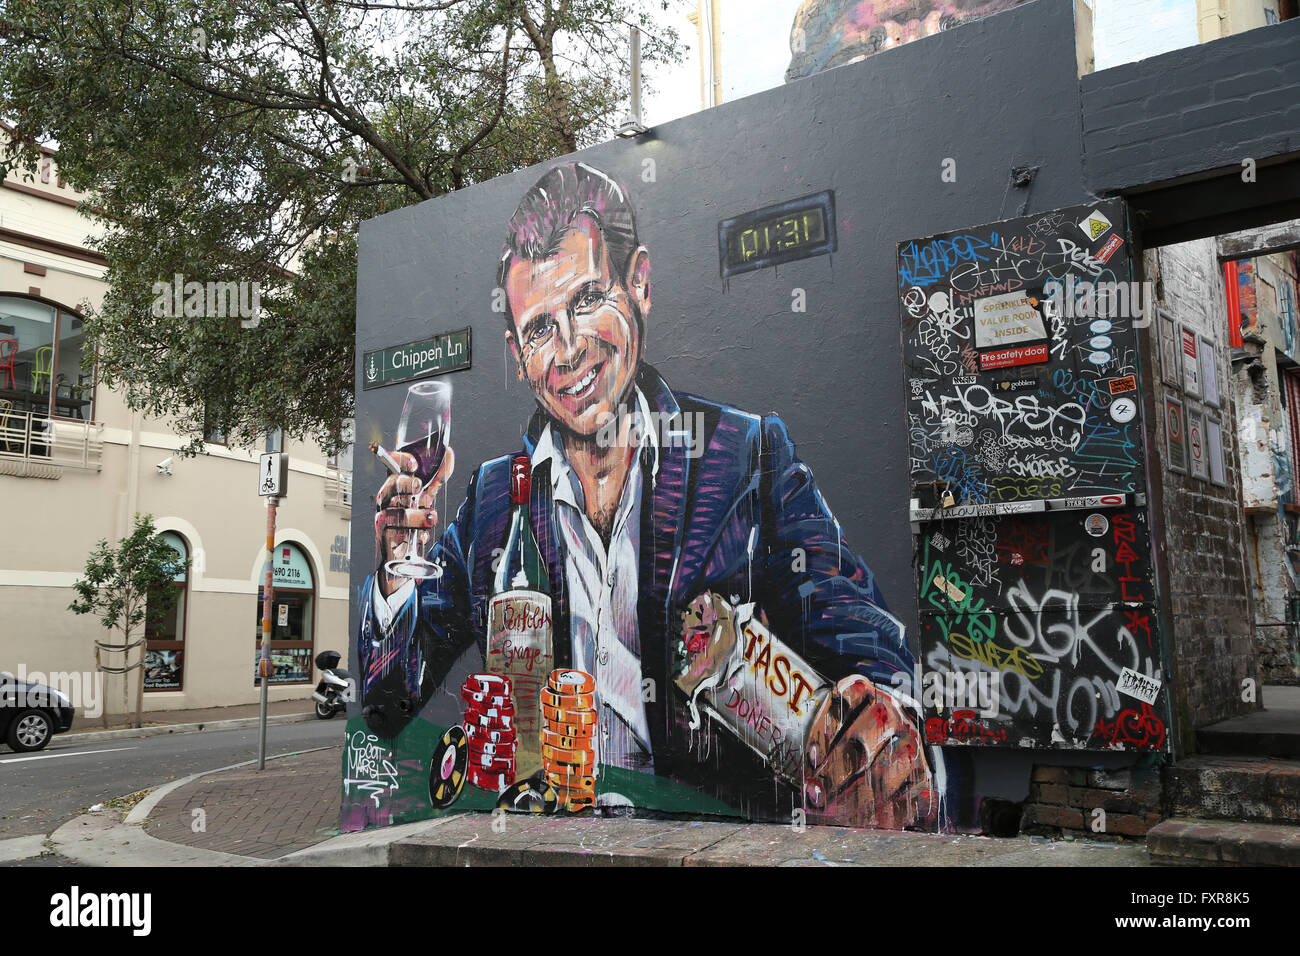 Sydney, Australia. 18 April 2016. Artist Scott Marsh, renowned for his Kanye Loves Kanye mural has made another mural, this time of NSW Premier, Mike Baird in a statement about Sydney's lockout laws. The Premier is depicted holding a kebab and glass of wine surrounded by poker chips. The mural can be seen on Chippen Lane in Chippendale, Sydney, just a short walk from the previous mural on Teggs Lane, which has now been painted over. Credit: Richard Milnes/Alamy Live News Stock Photo